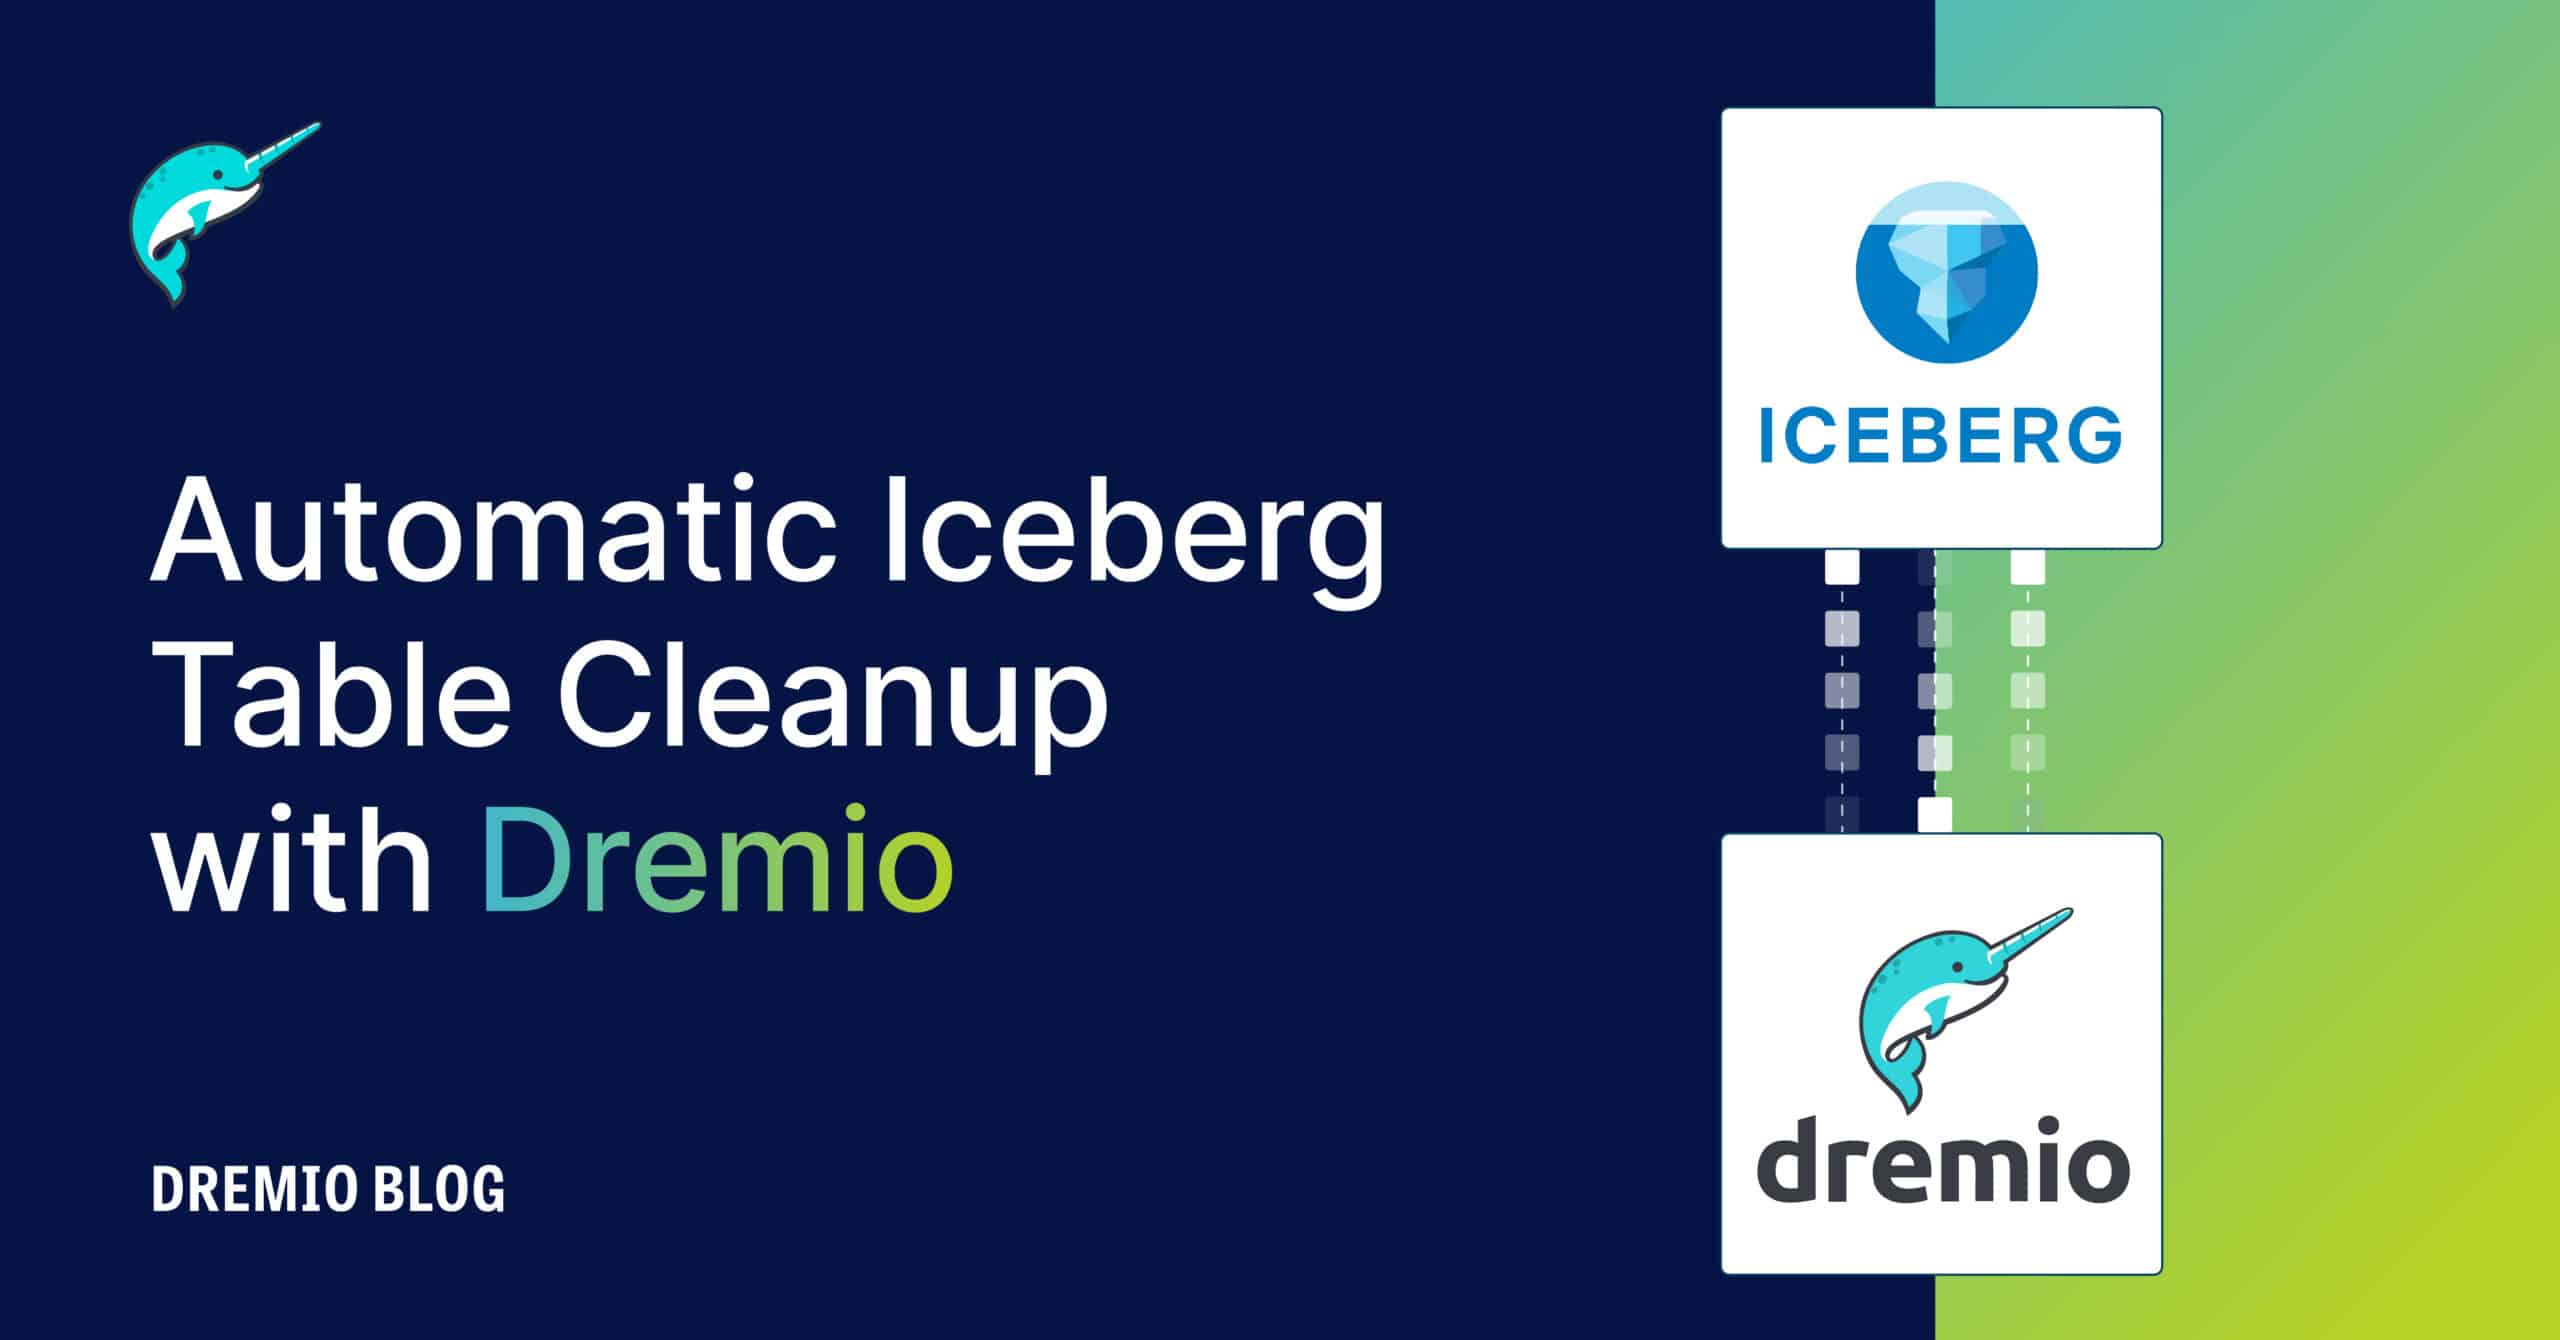 Automatic Iceberg Table Cleanup with Dremio